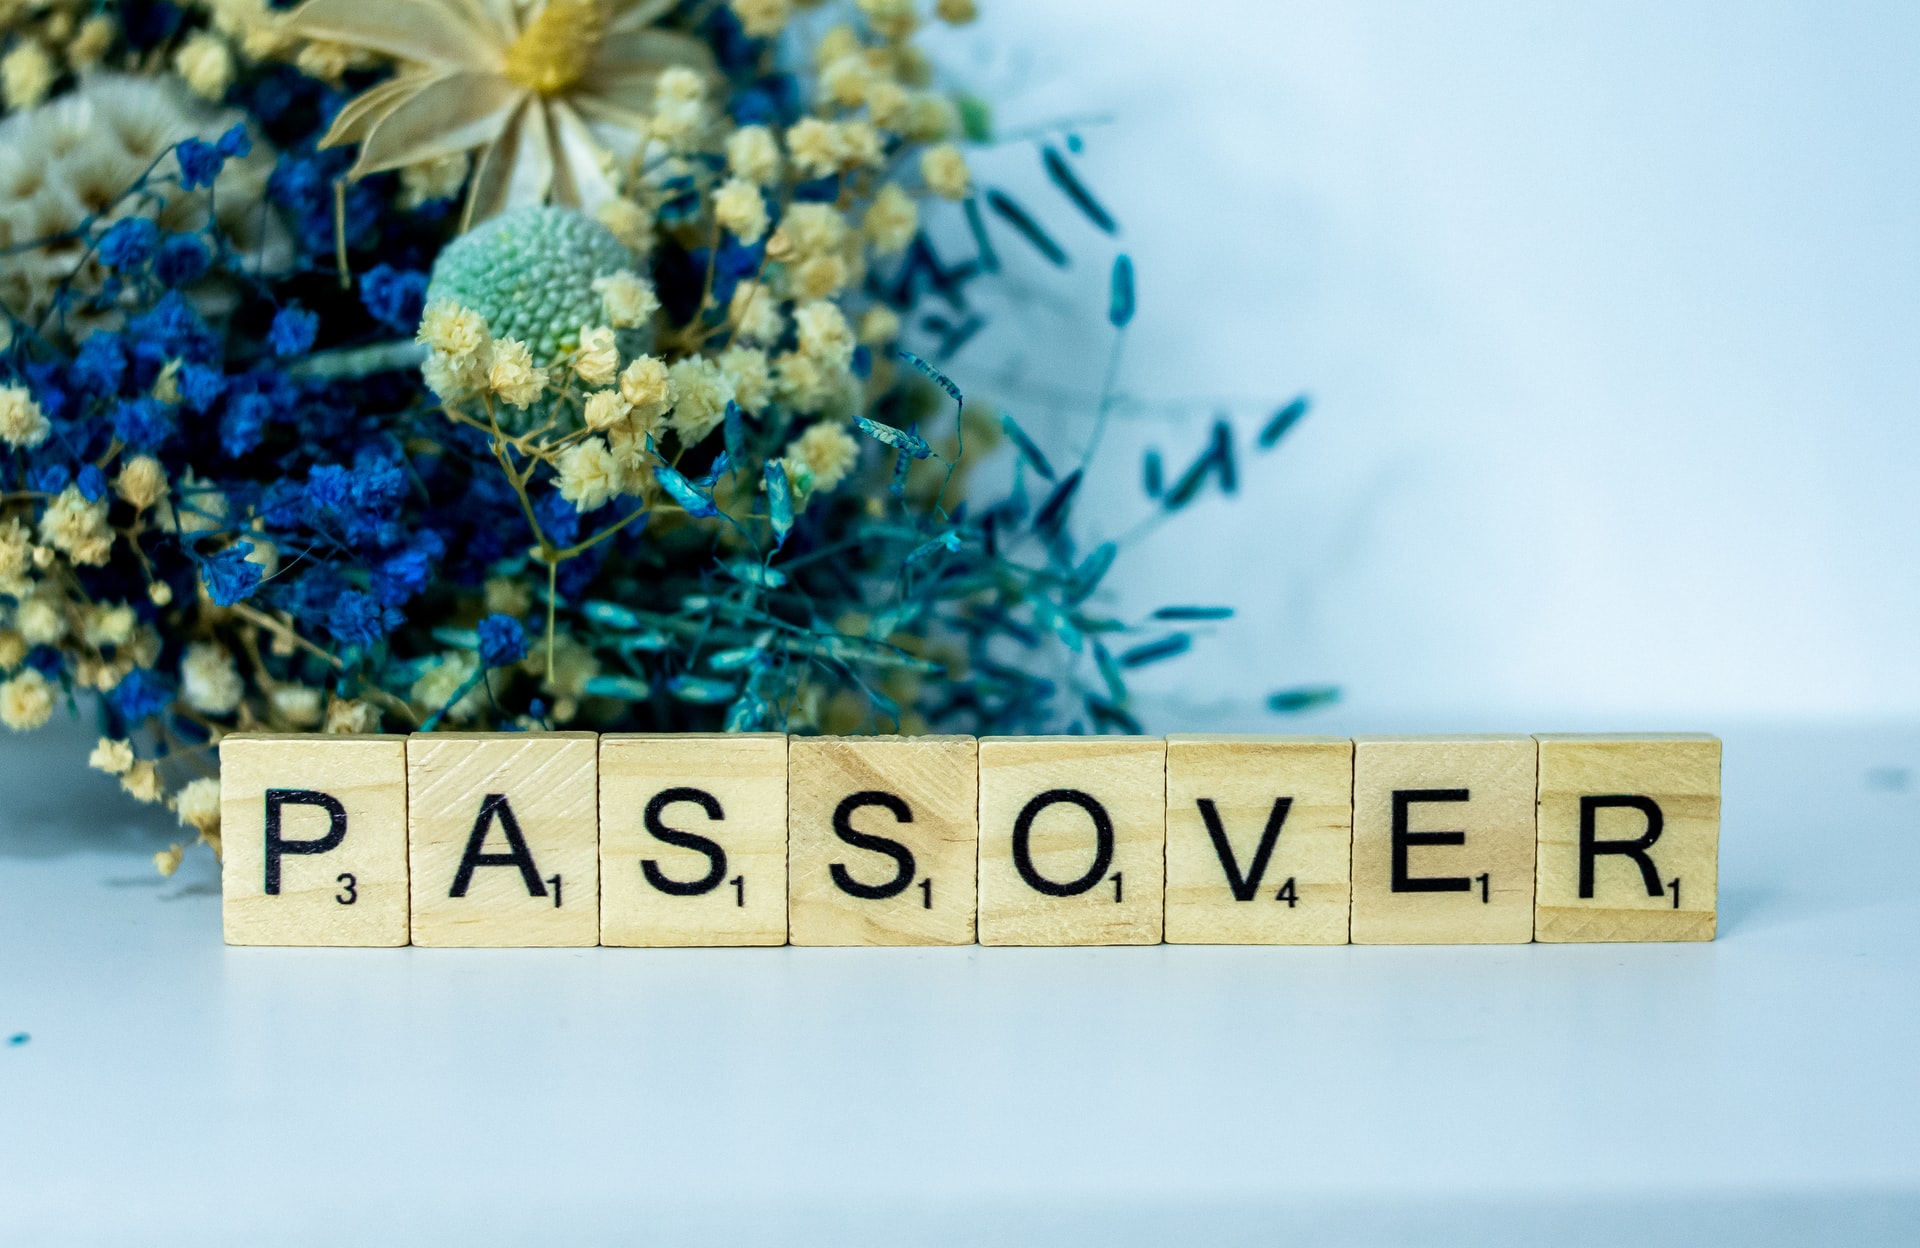 The word Passover